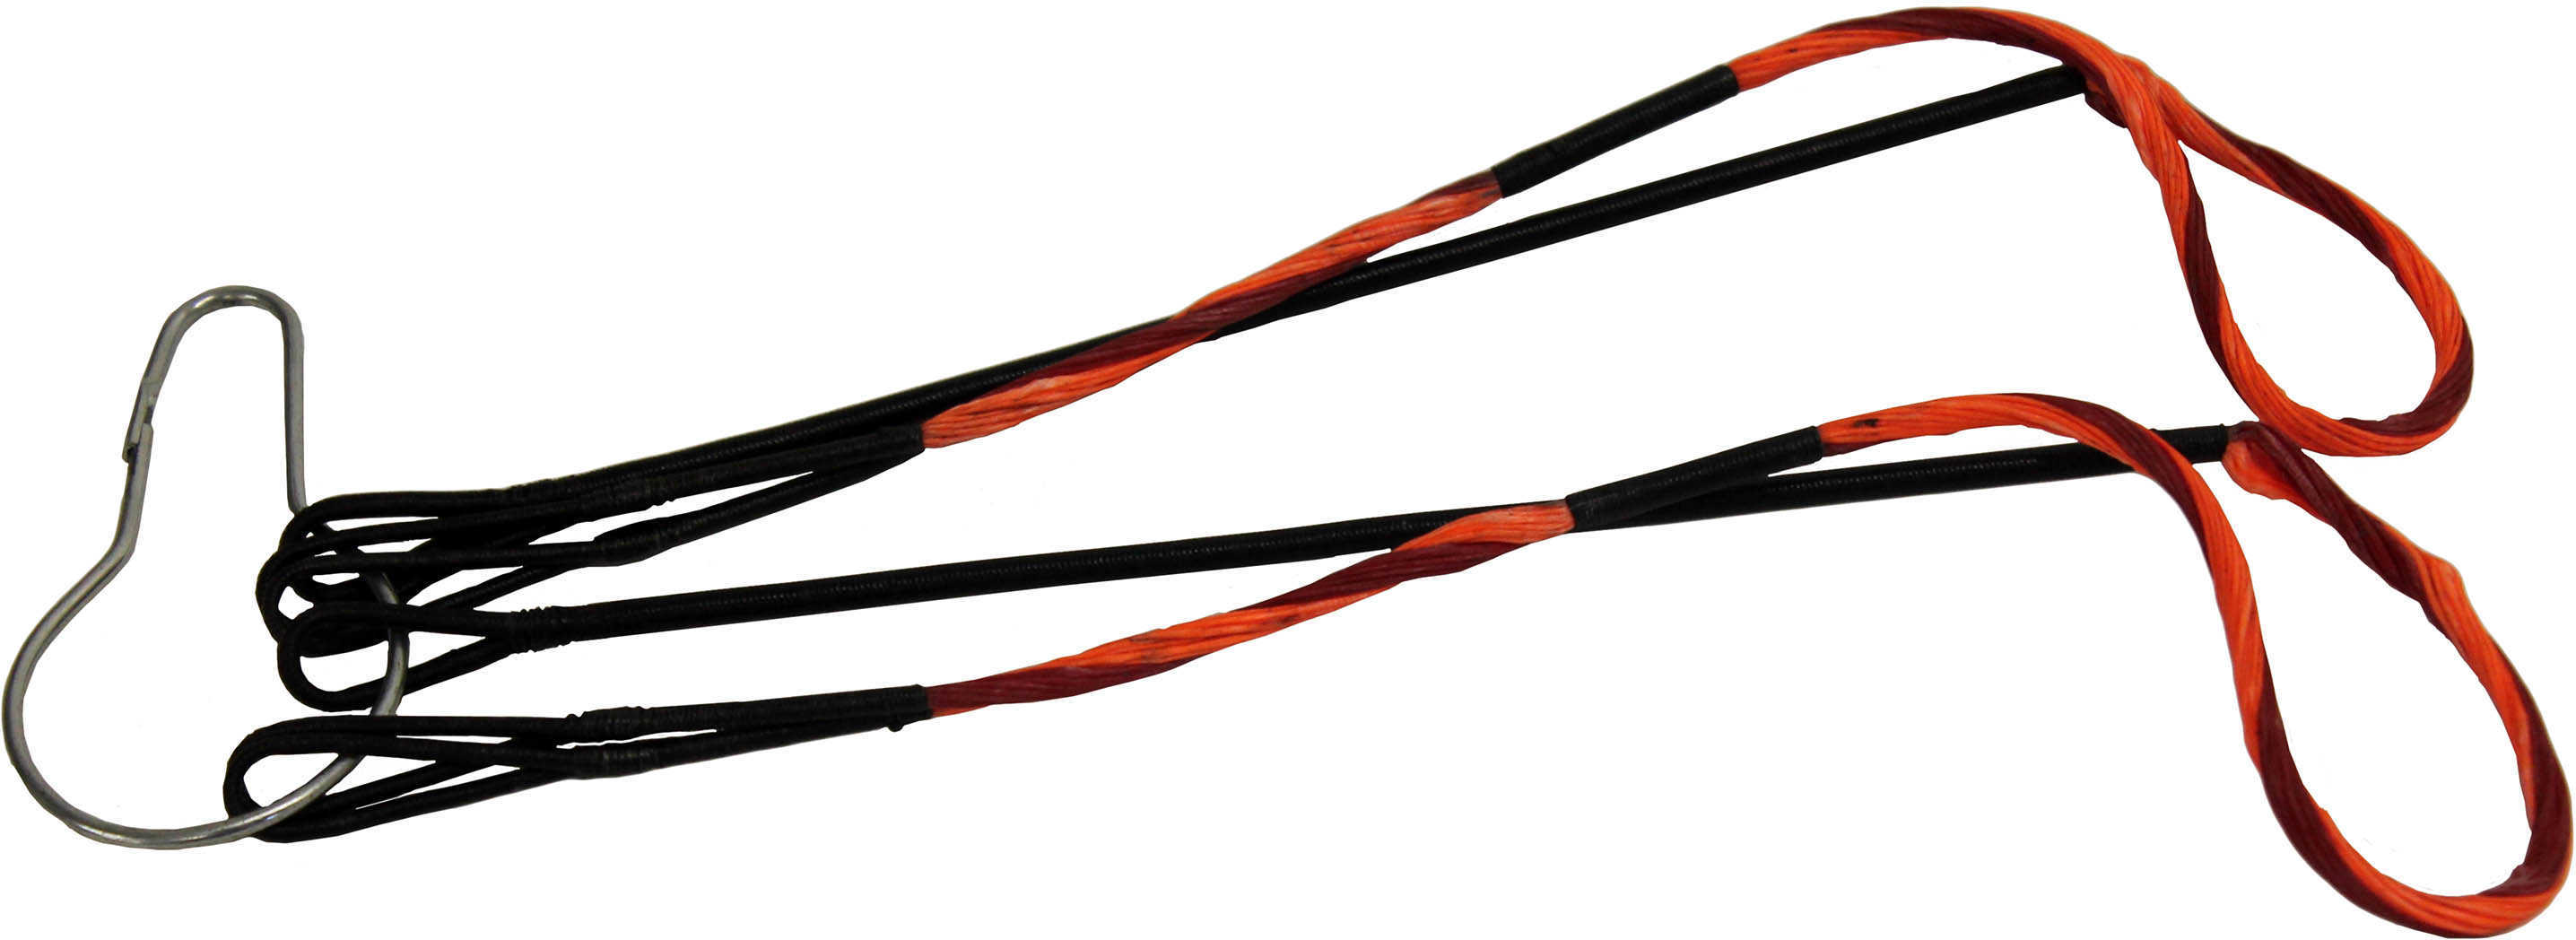 TenPoint Crossbow Technologies Point Replacement Cables Stealth FX4 Orange Md: HCA-12515-O